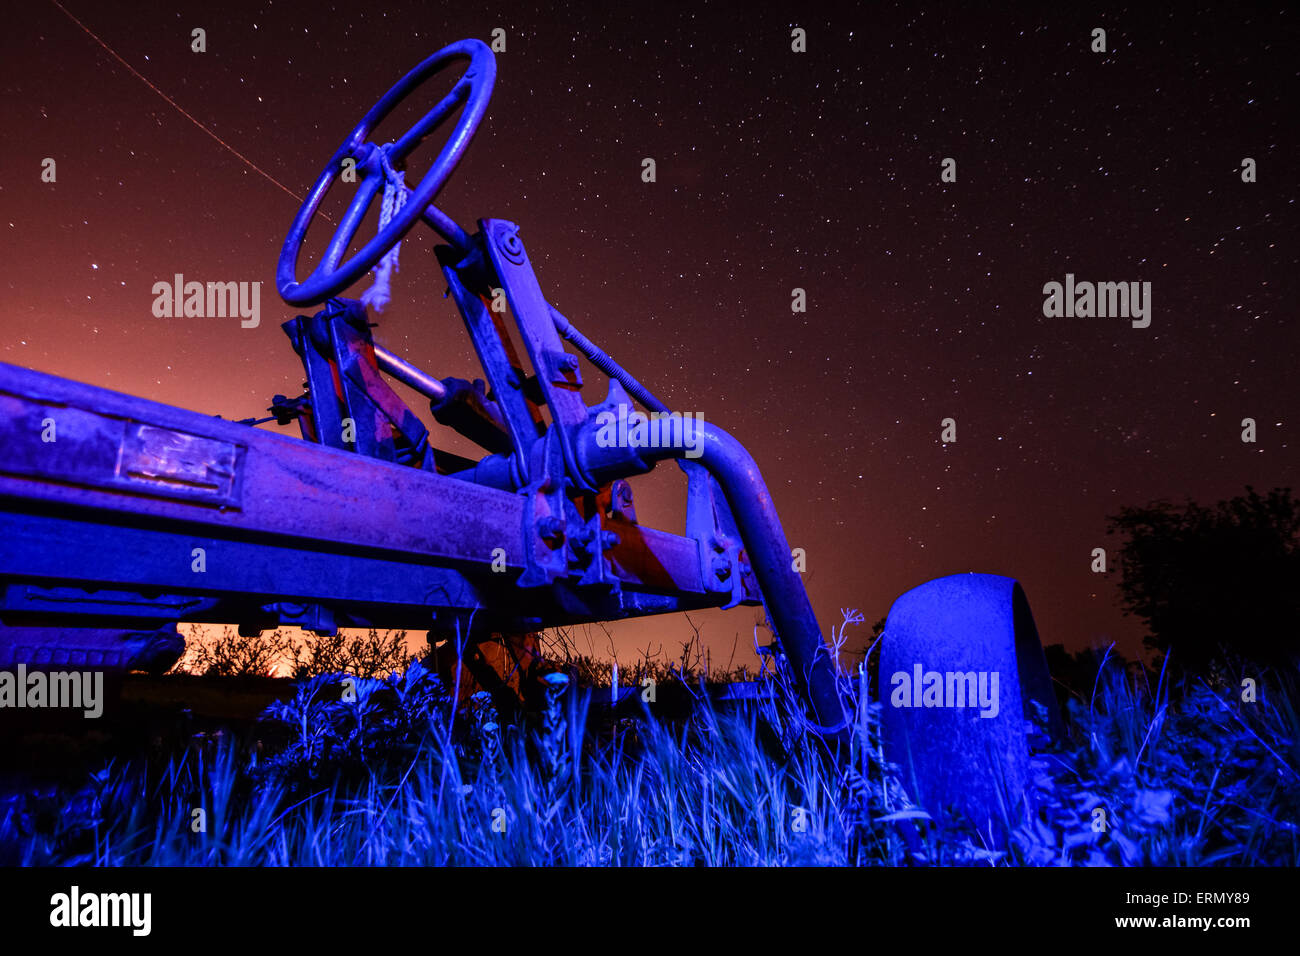 Run of time  concept - old rusty tractor on starry night background Stock Photo